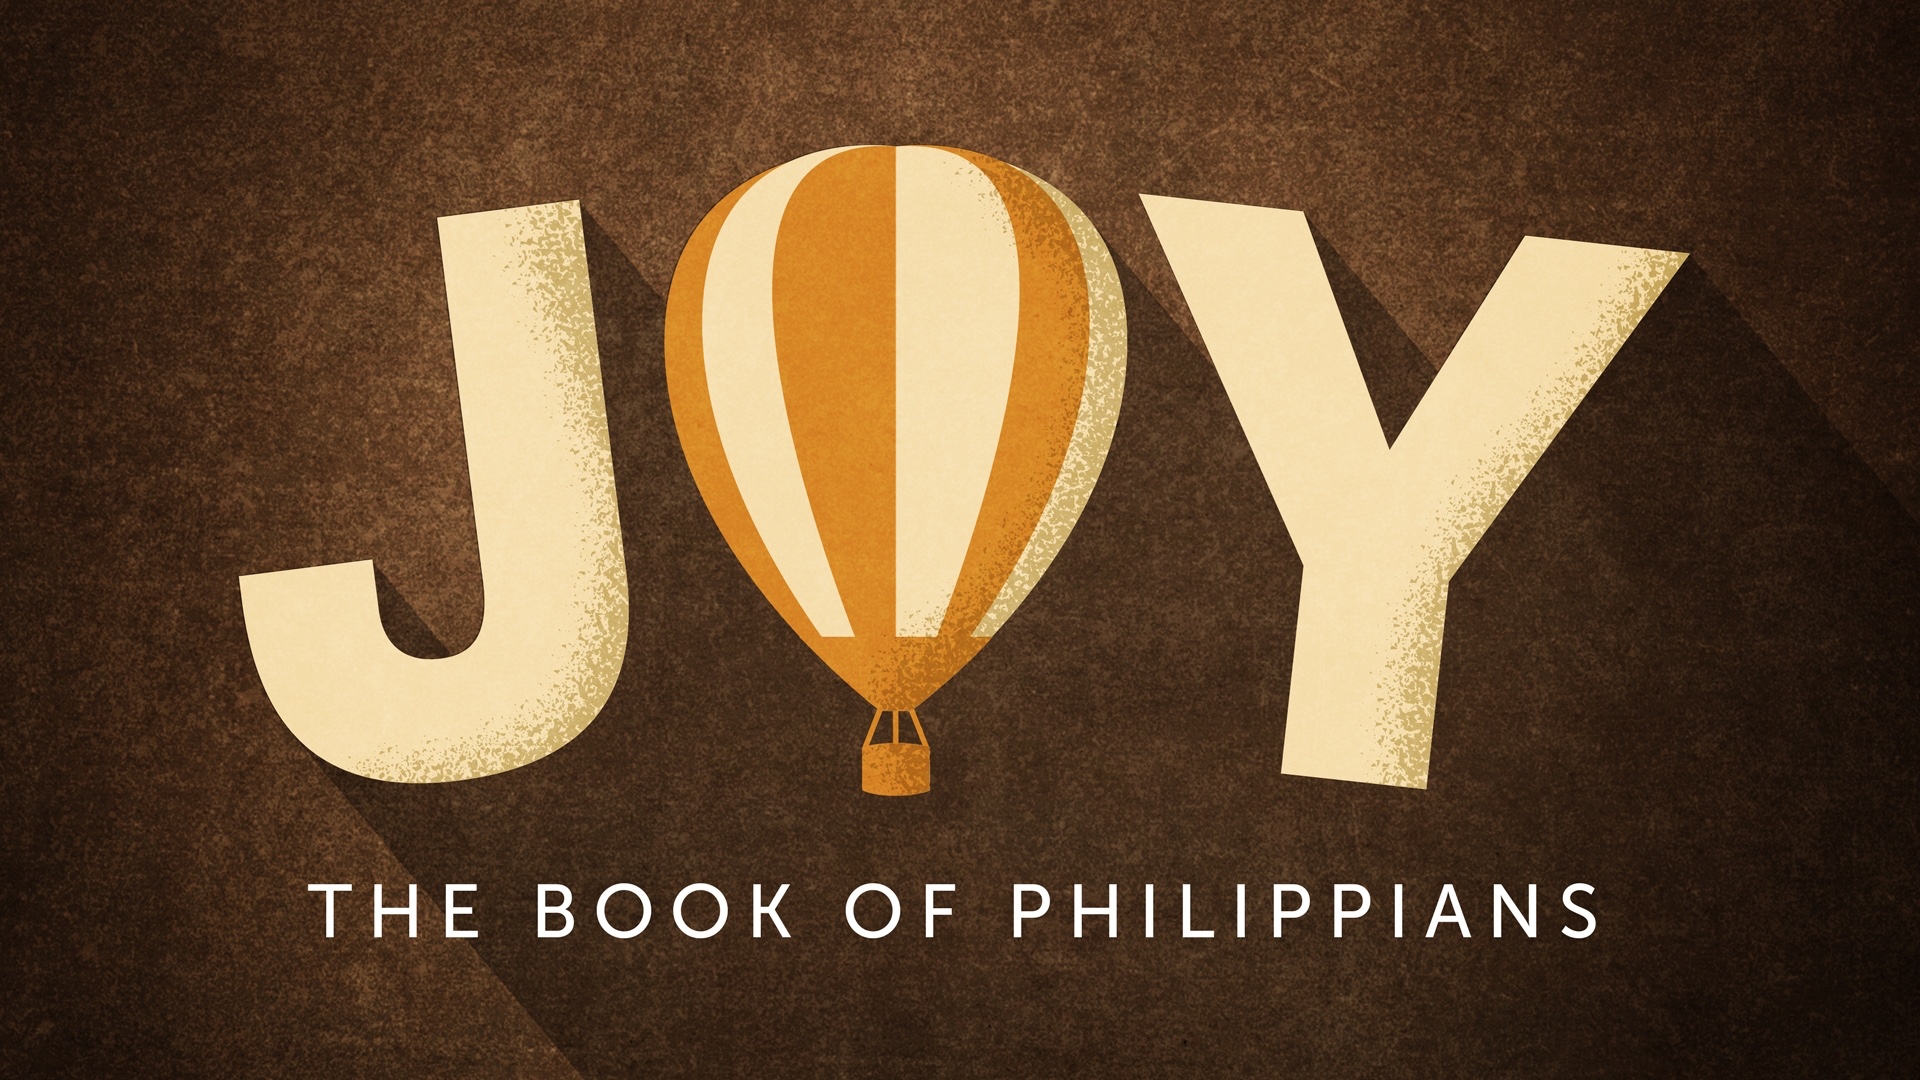 Joy: The Book of Philippians - Finding Joy in Humility